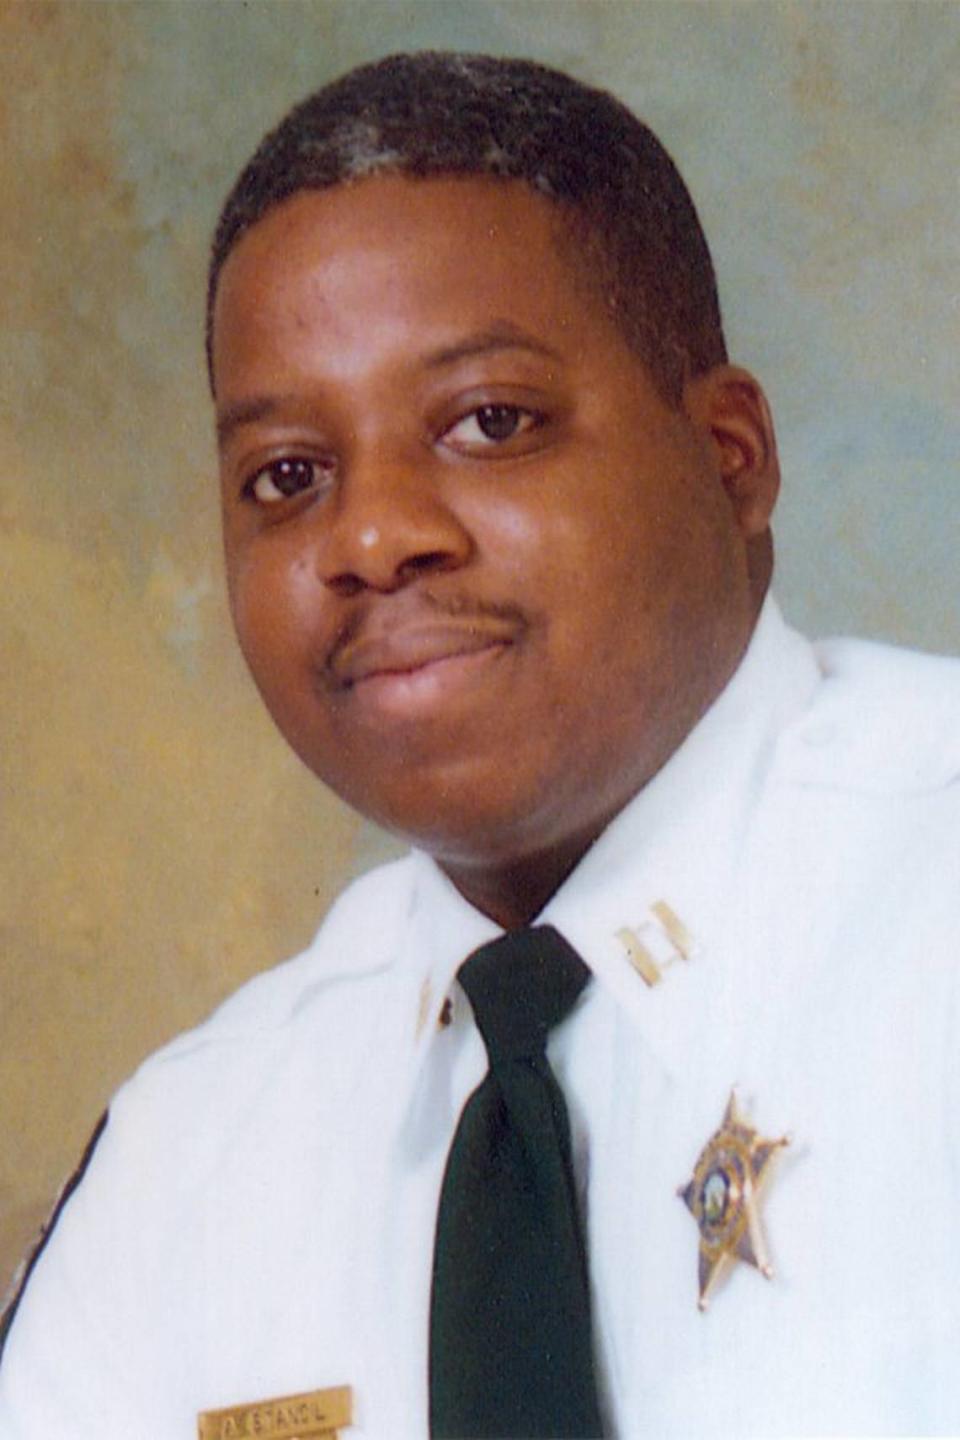 Mecklenburg County Sheriff’s Deputy Anthony Stancil was a U.S. Marine Corps veteran and served with the Mecklenburg County Sheriff’s Office for eight years. MECK SHERIFFS DEPT